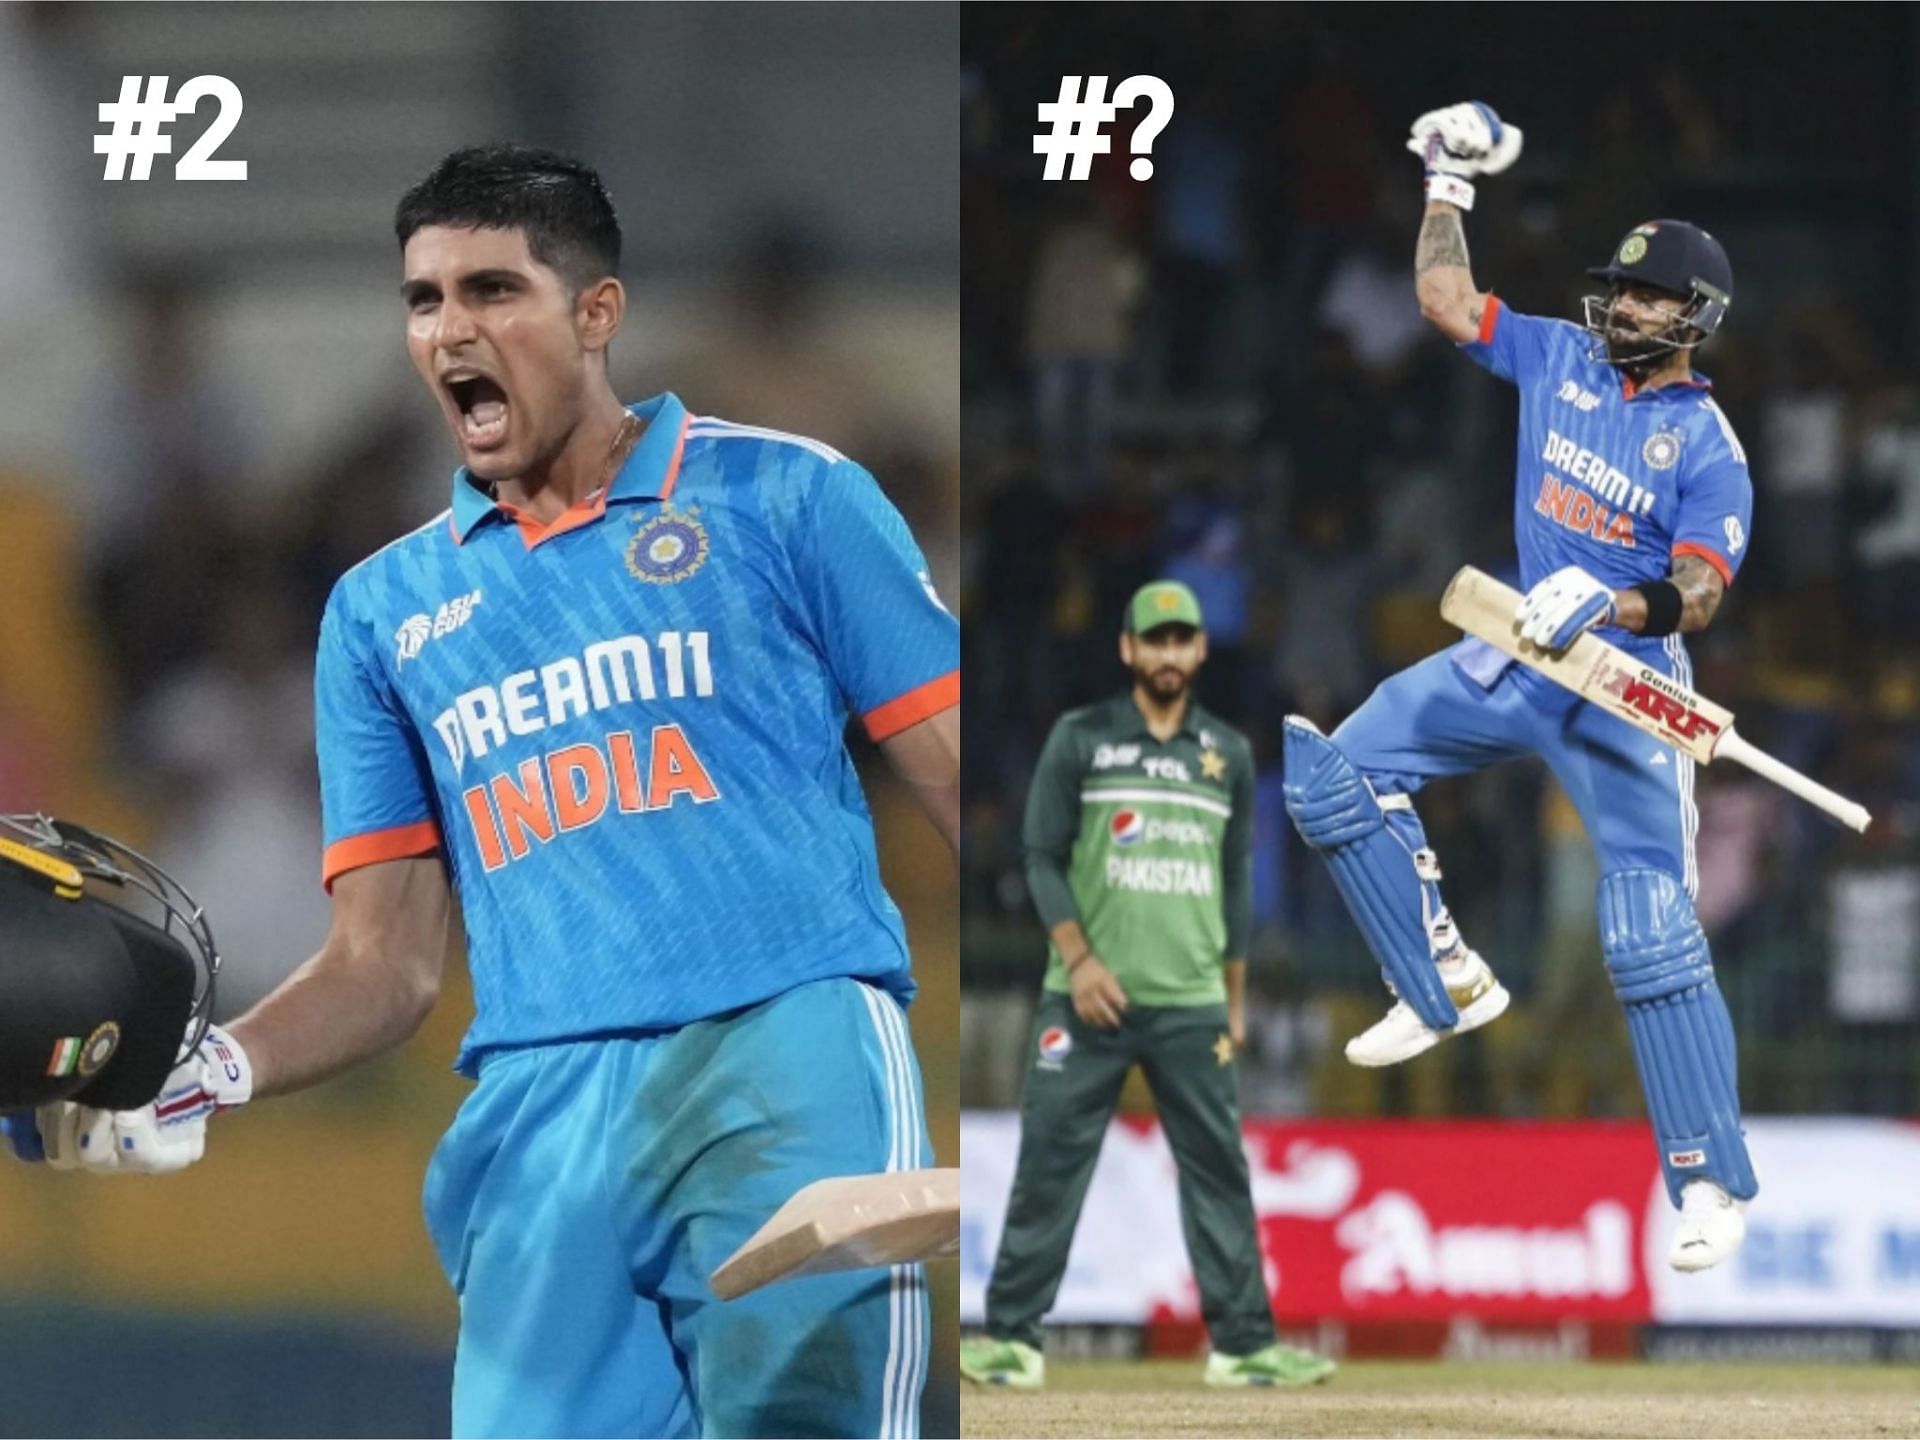 Best batting performances features Shubman Gill and Virat Kohli [Getty Images]